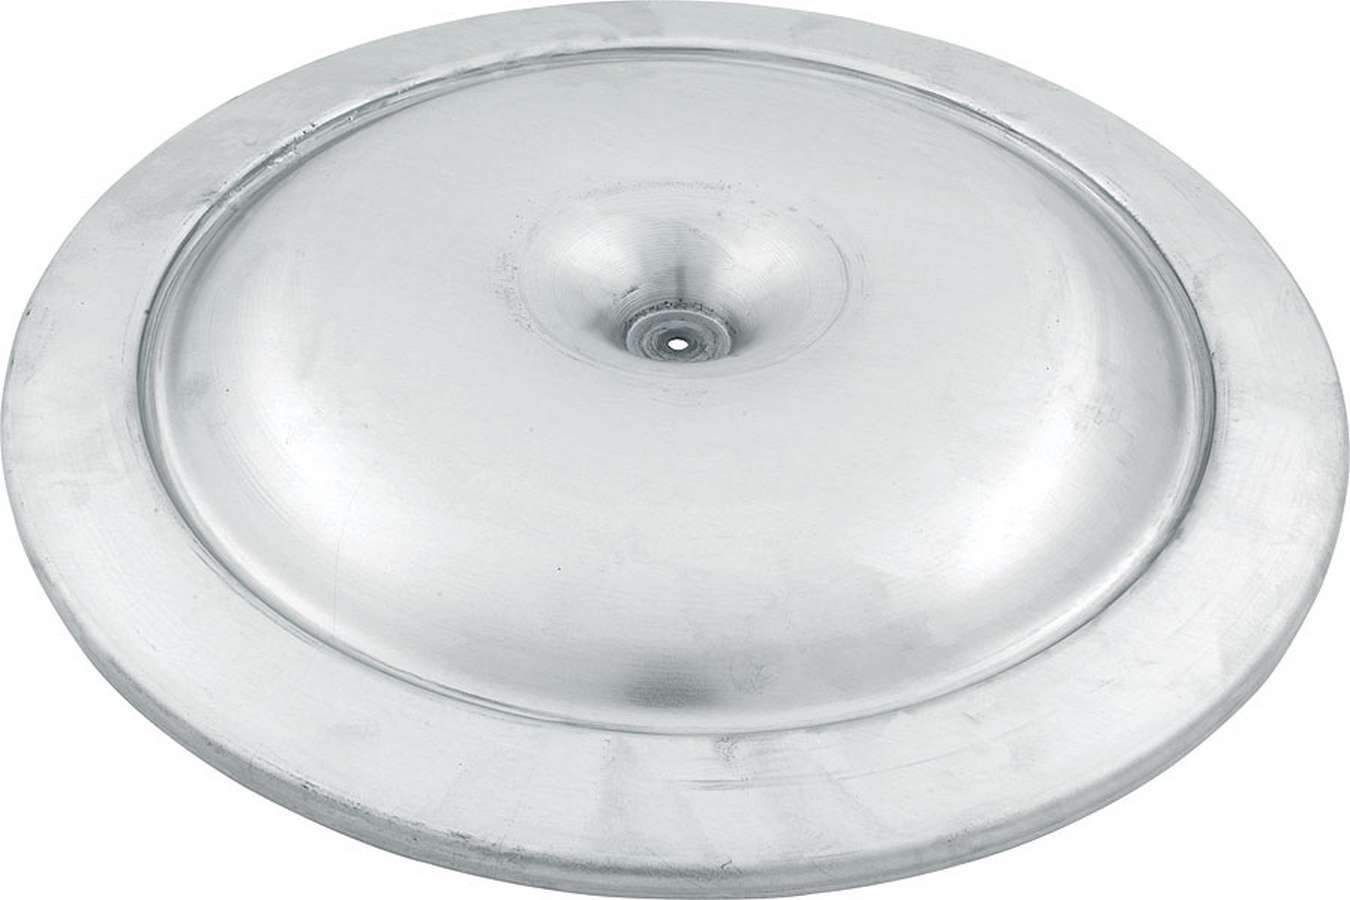 Allstar Performance 26089 Air Cleaner Lid, 16 in Round, Aluminum, Natural, Each